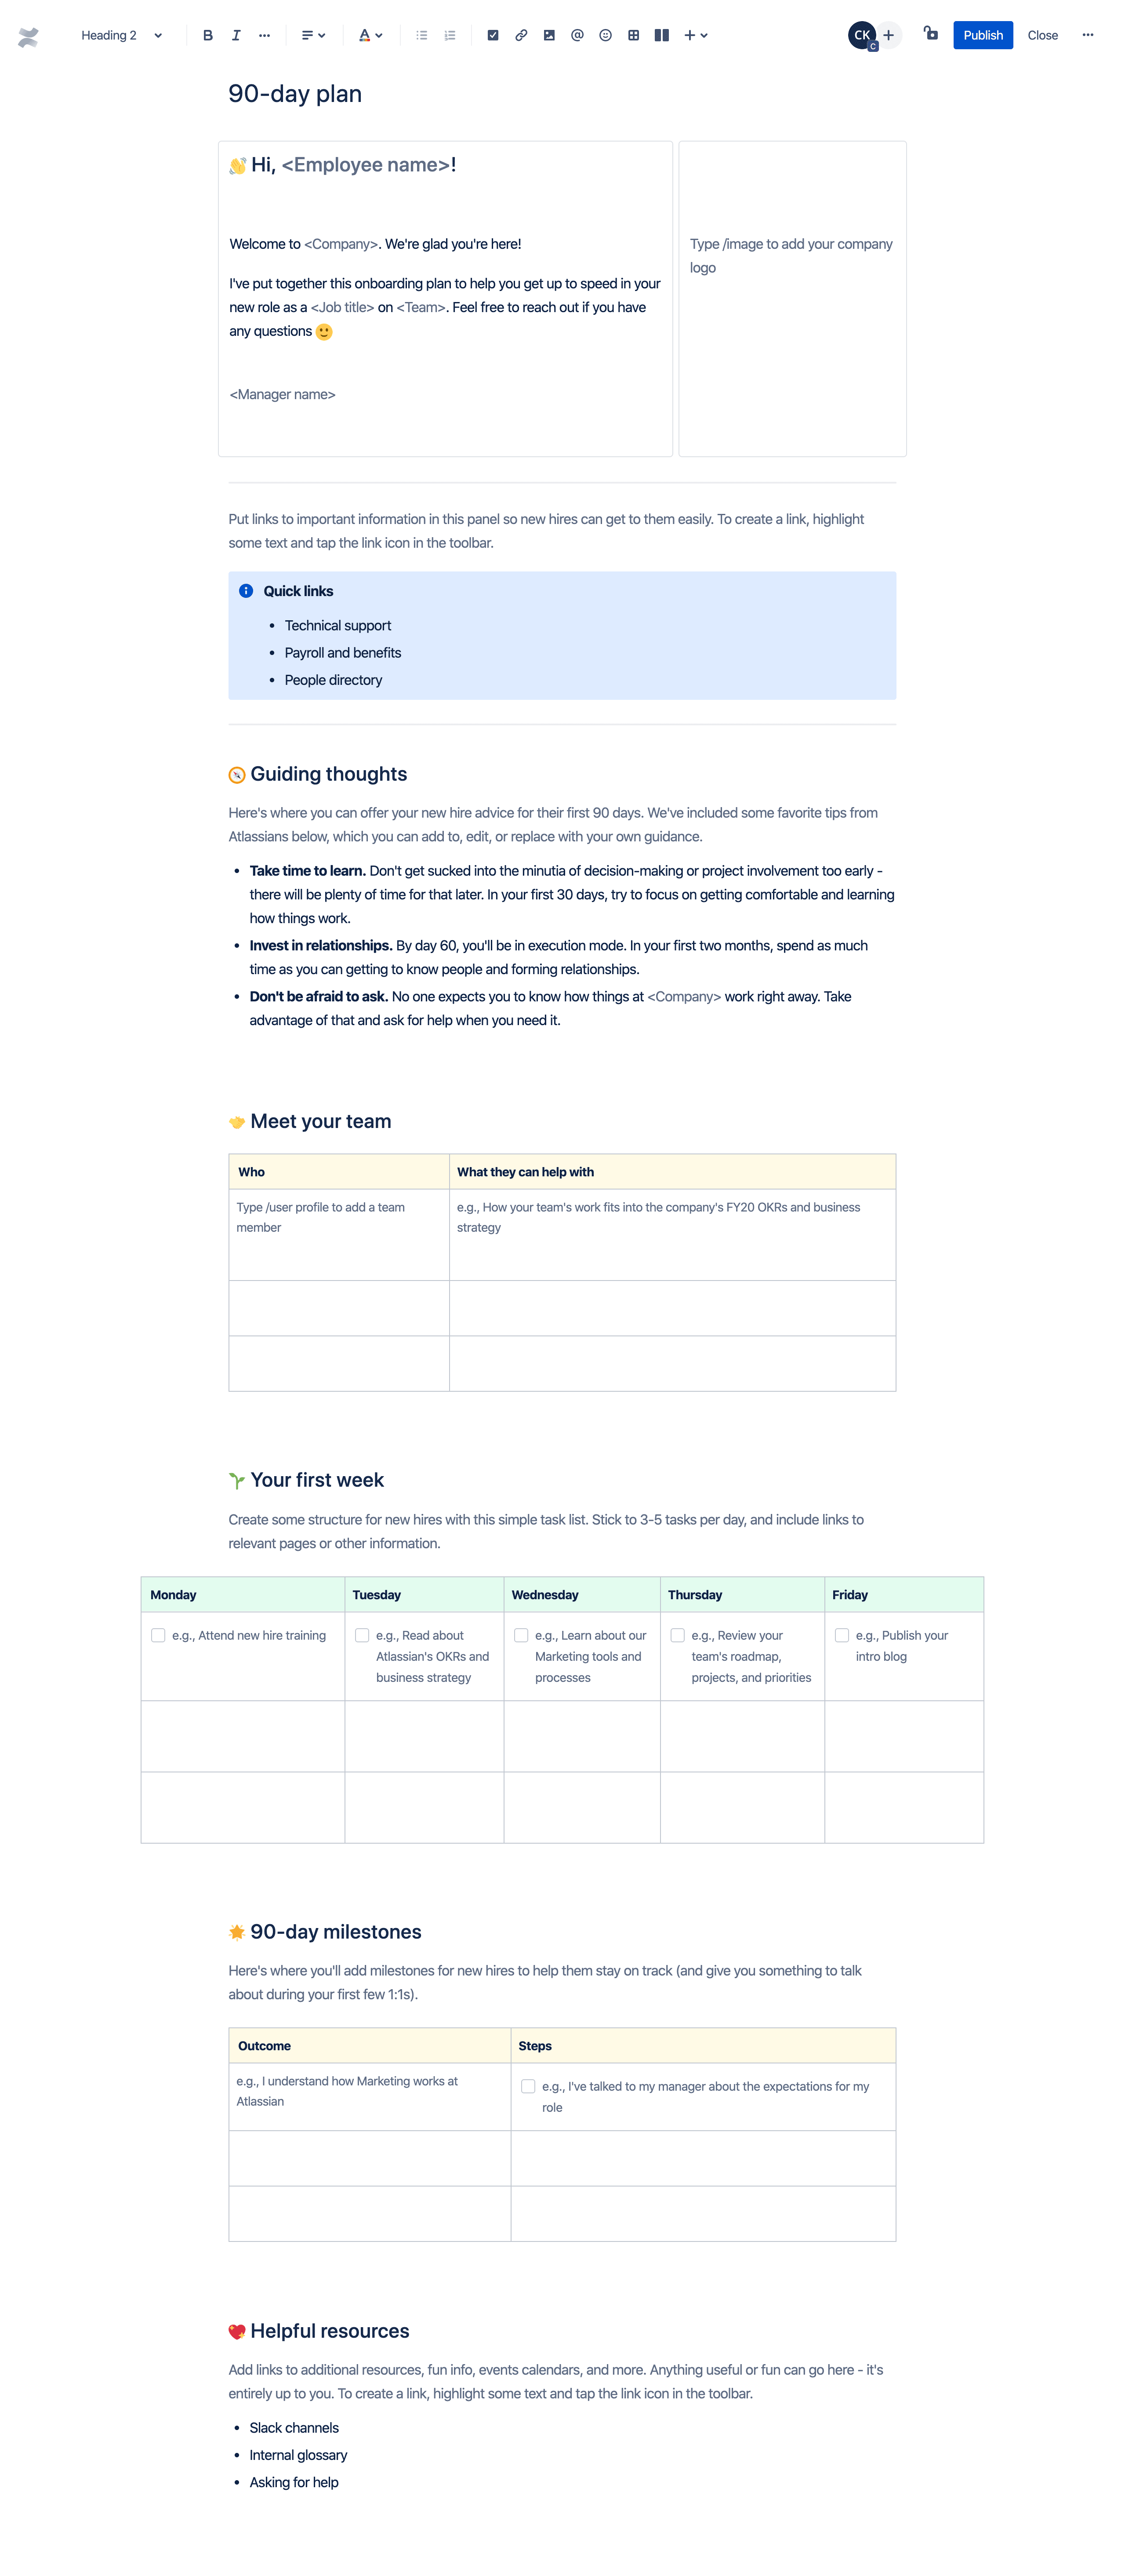 90 day transition plan template